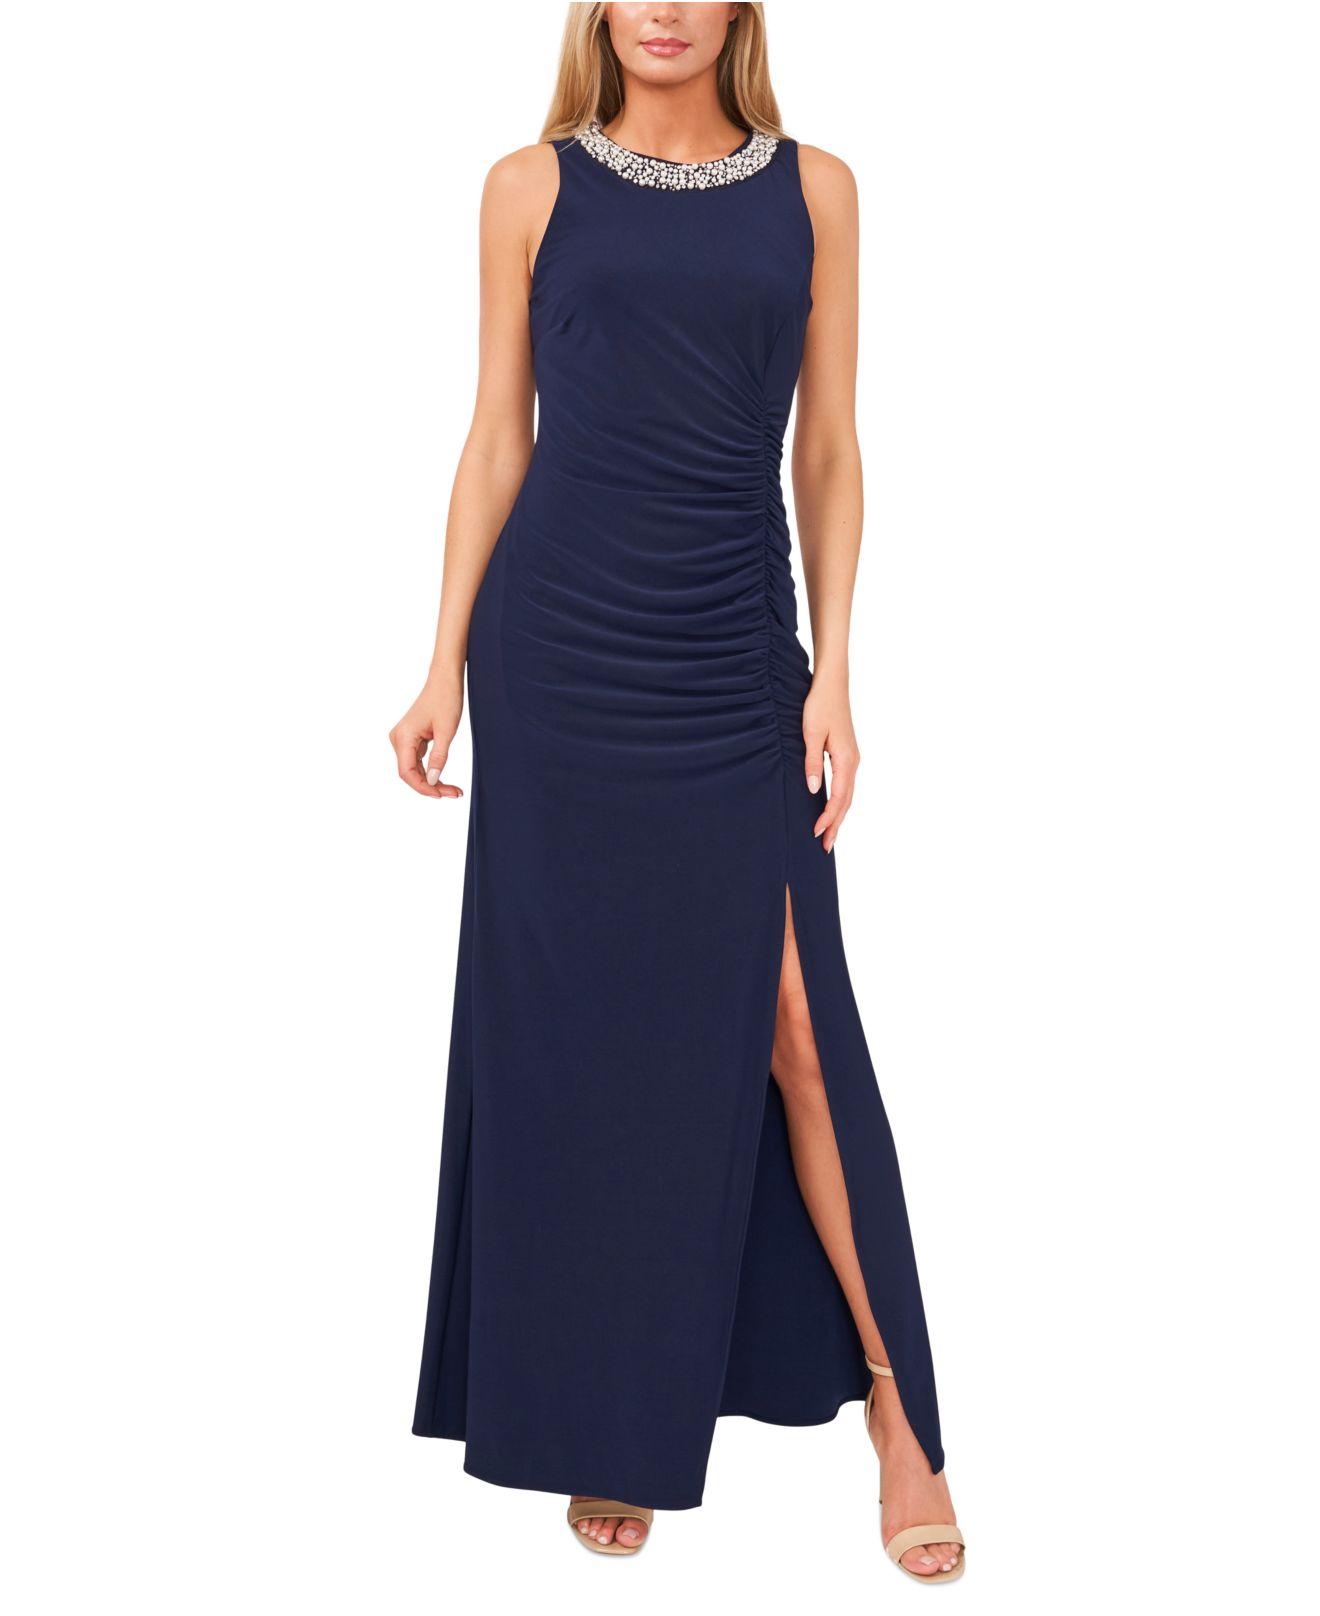 Msk Petite Embellished Ruched Gown in Blue | Lyst